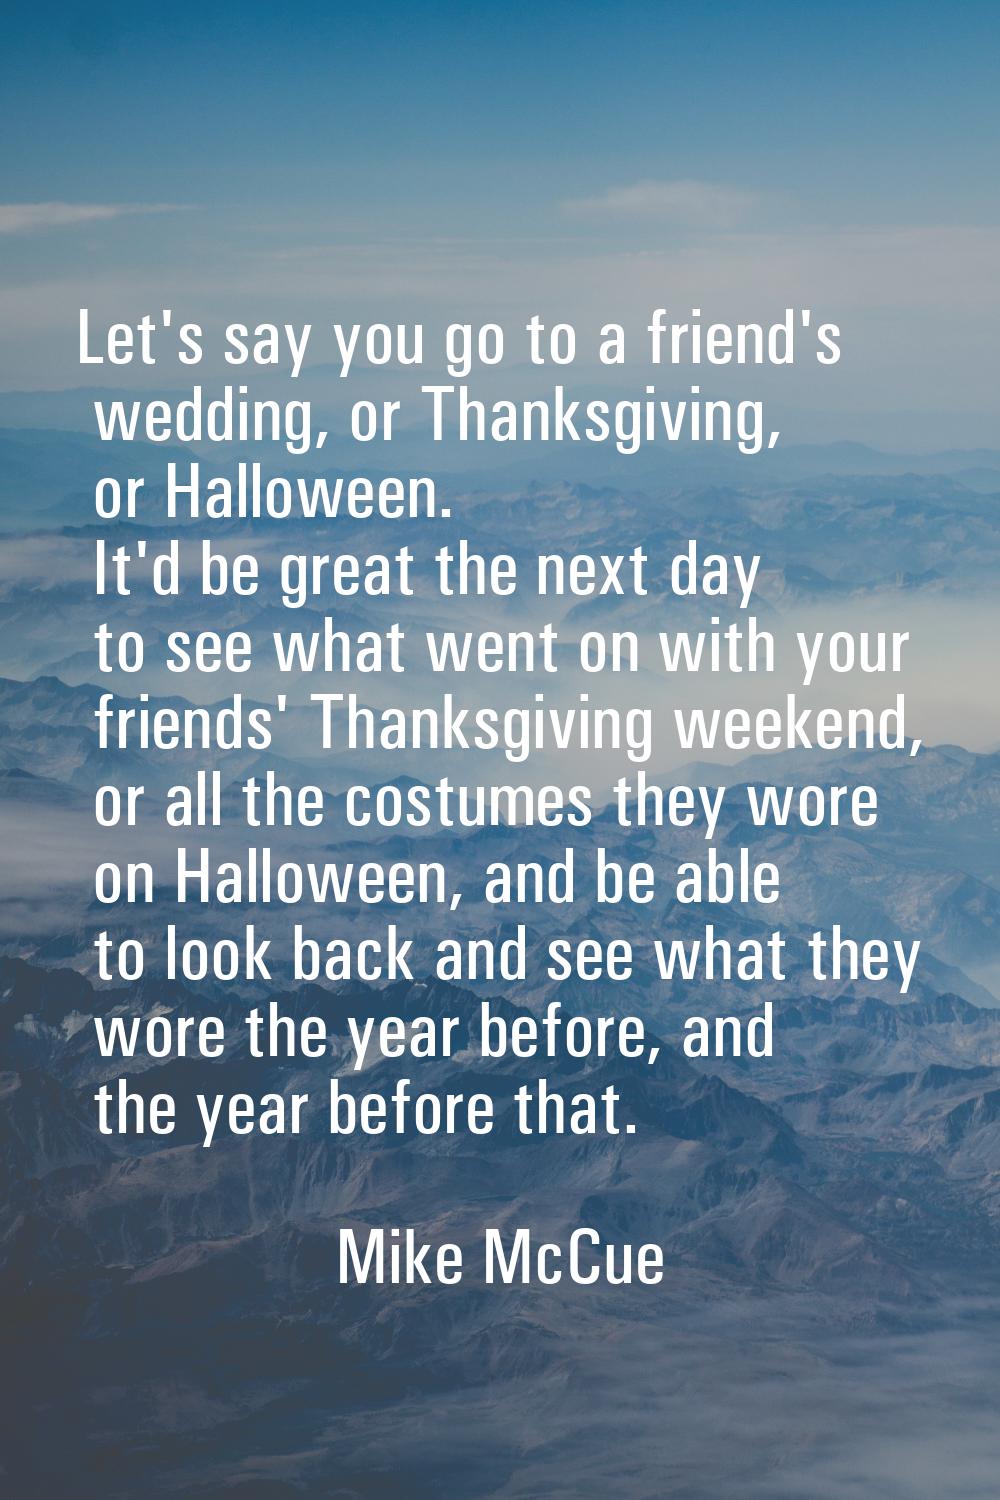 Let's say you go to a friend's wedding, or Thanksgiving, or Halloween. It'd be great the next day t